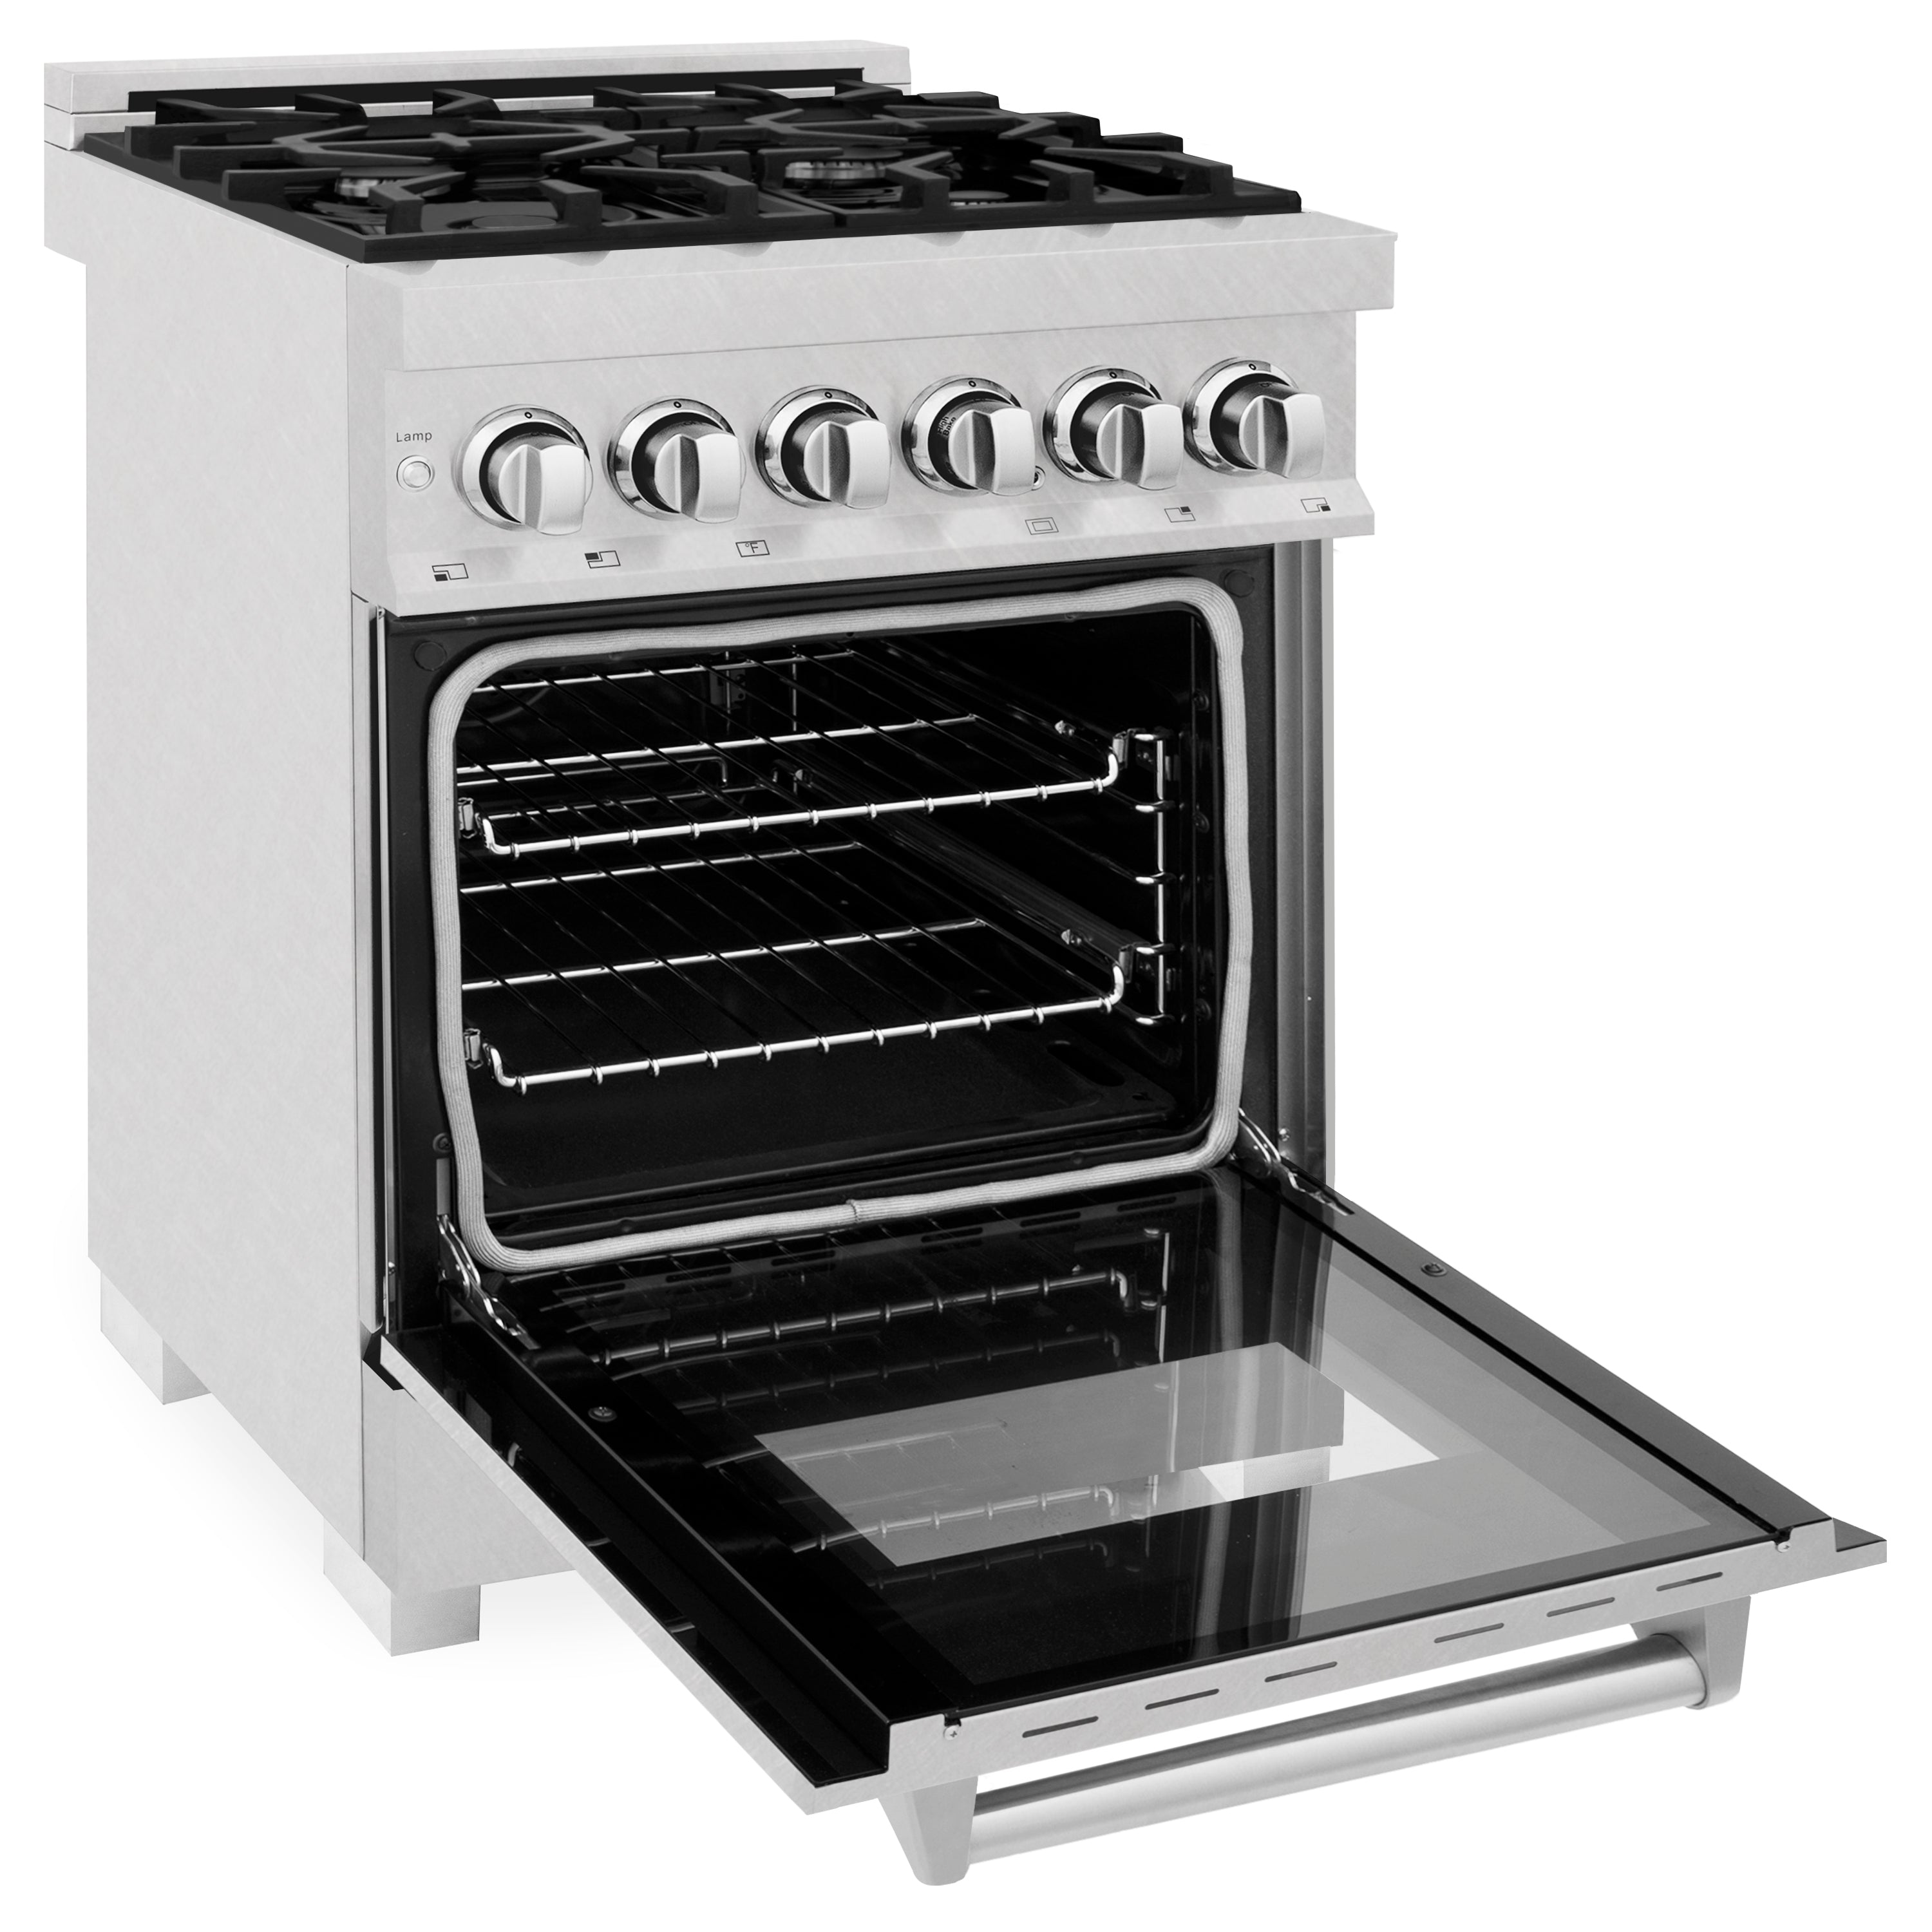 ZLINE 24" 2.8 cu. ft. Dual Fuel Range with Gas Stove and Electric Oven in Fingerprint Resistant Stainless Steel (RAS-24)